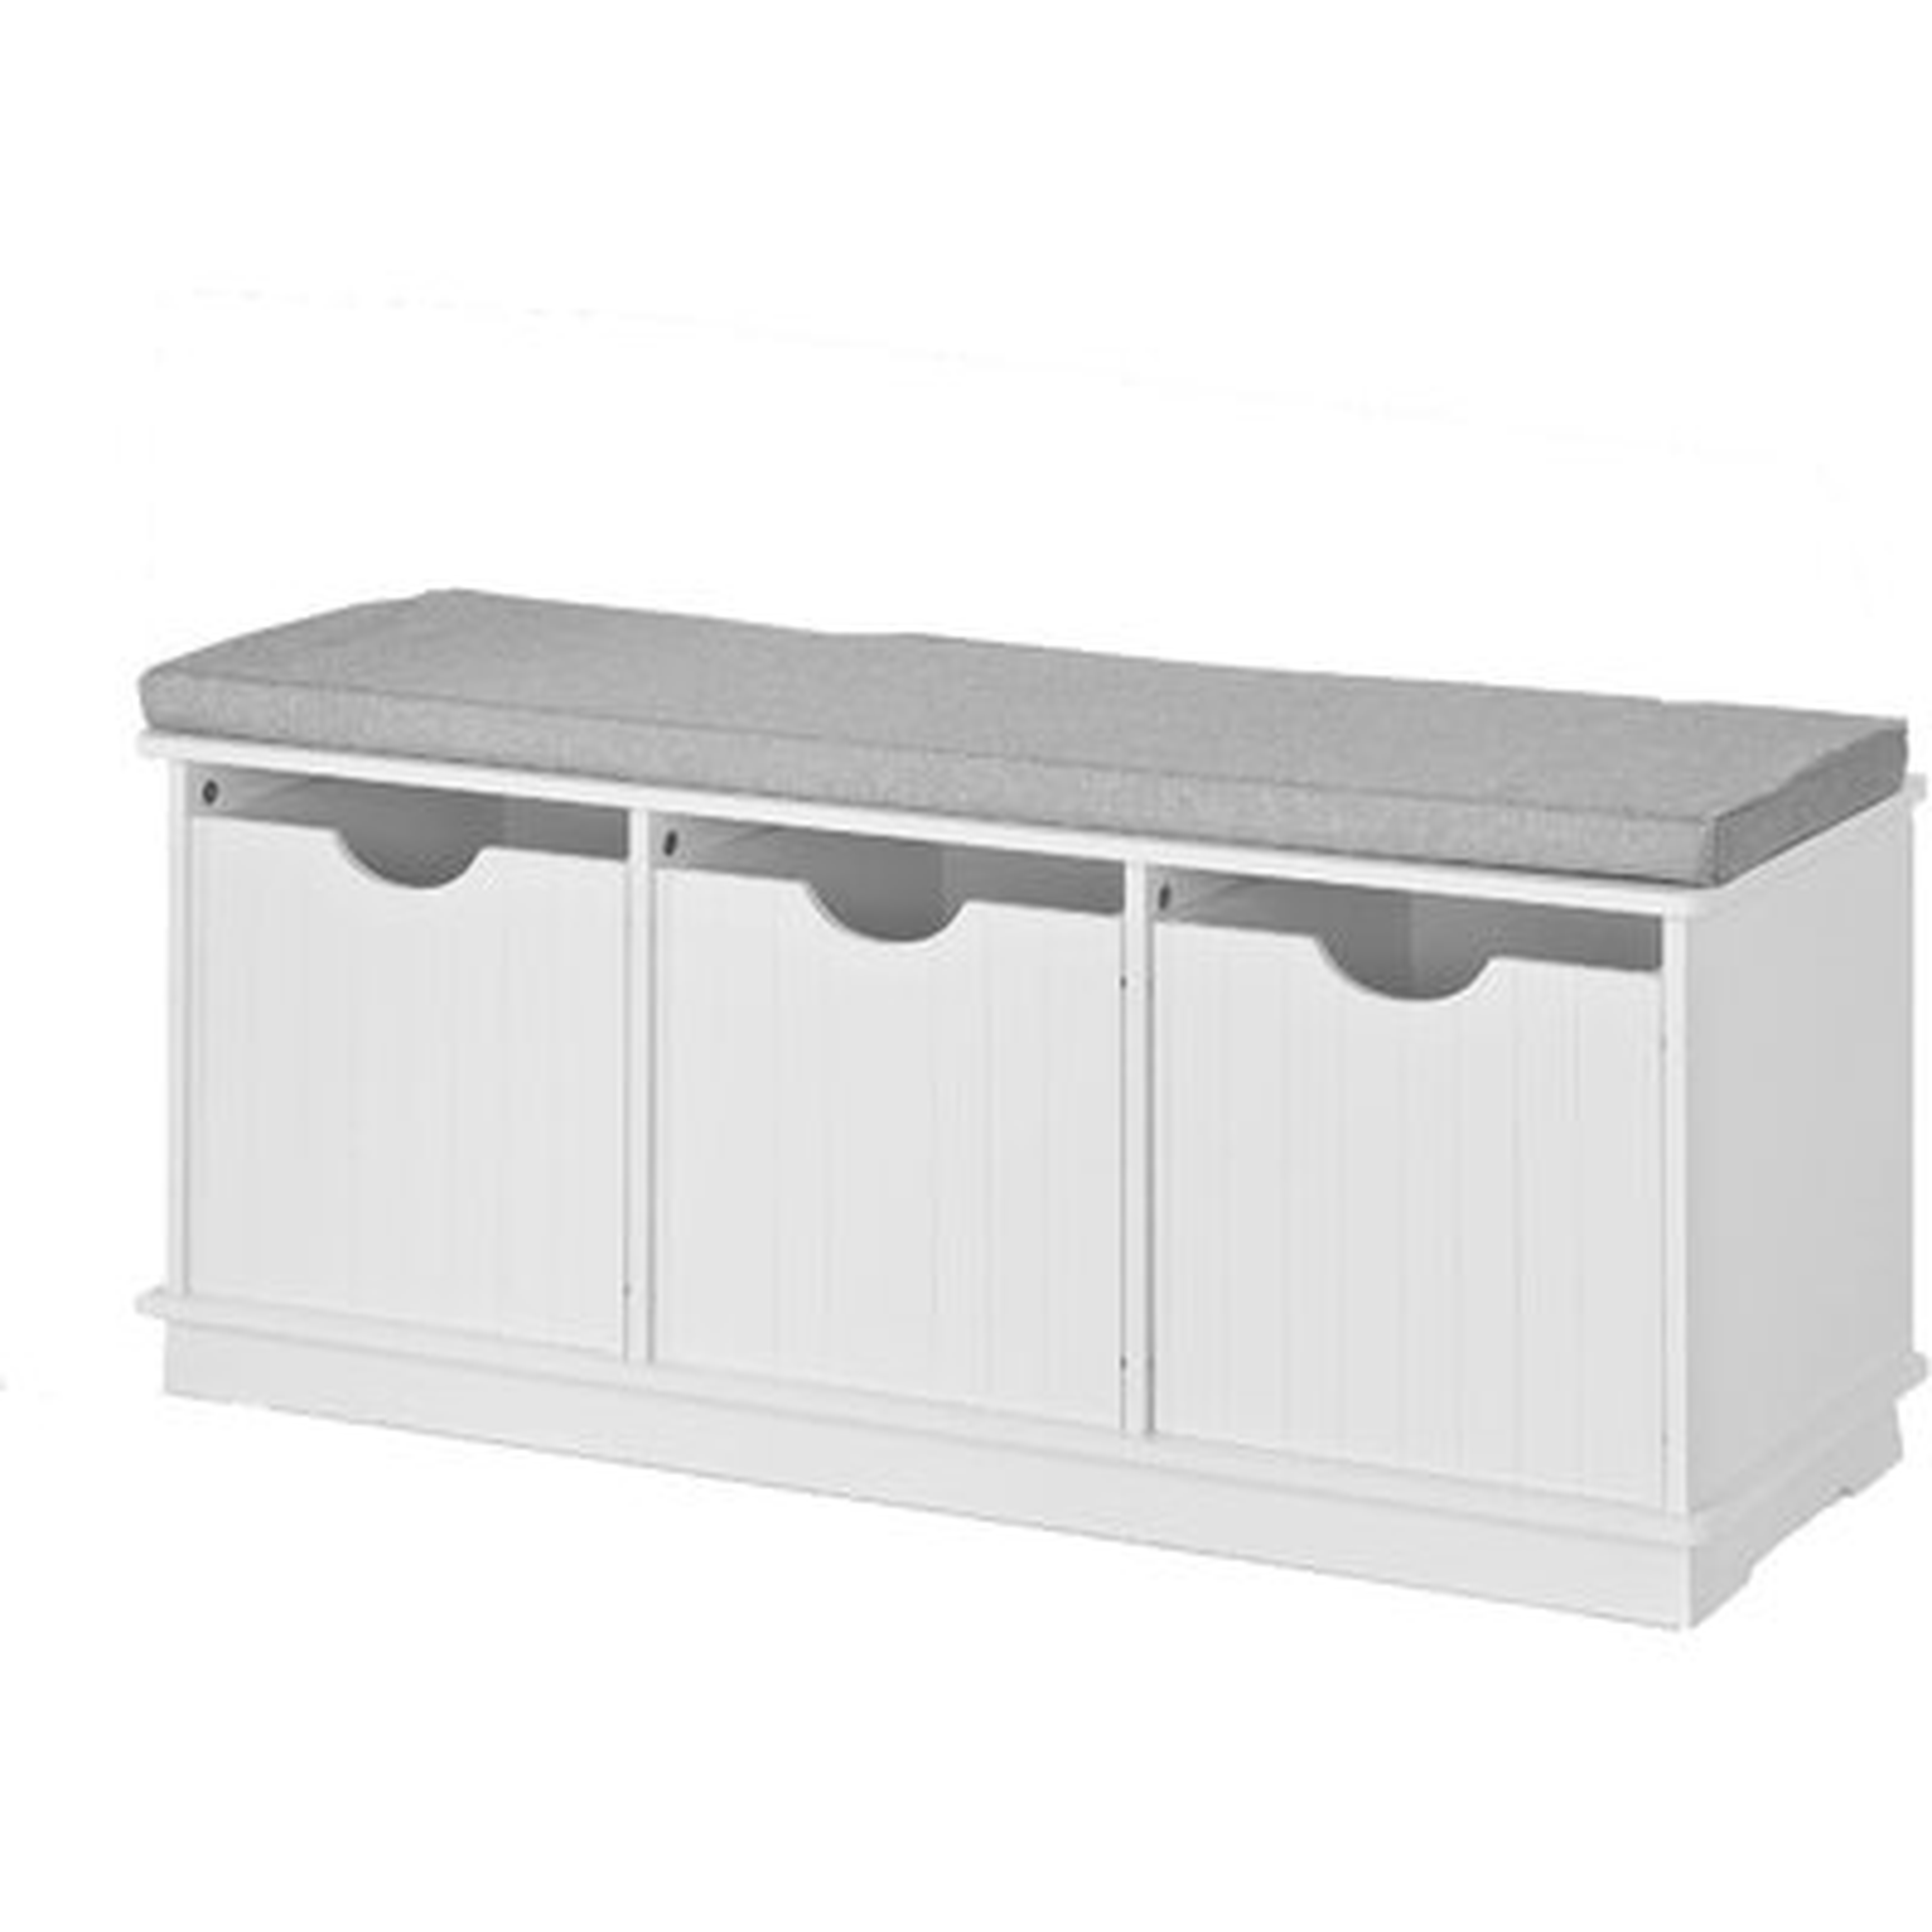 White Storage Bench With Drawers & Padded Seat Cushion, Hallway Bench Shoe Cabinet Shoe Bench - Wayfair